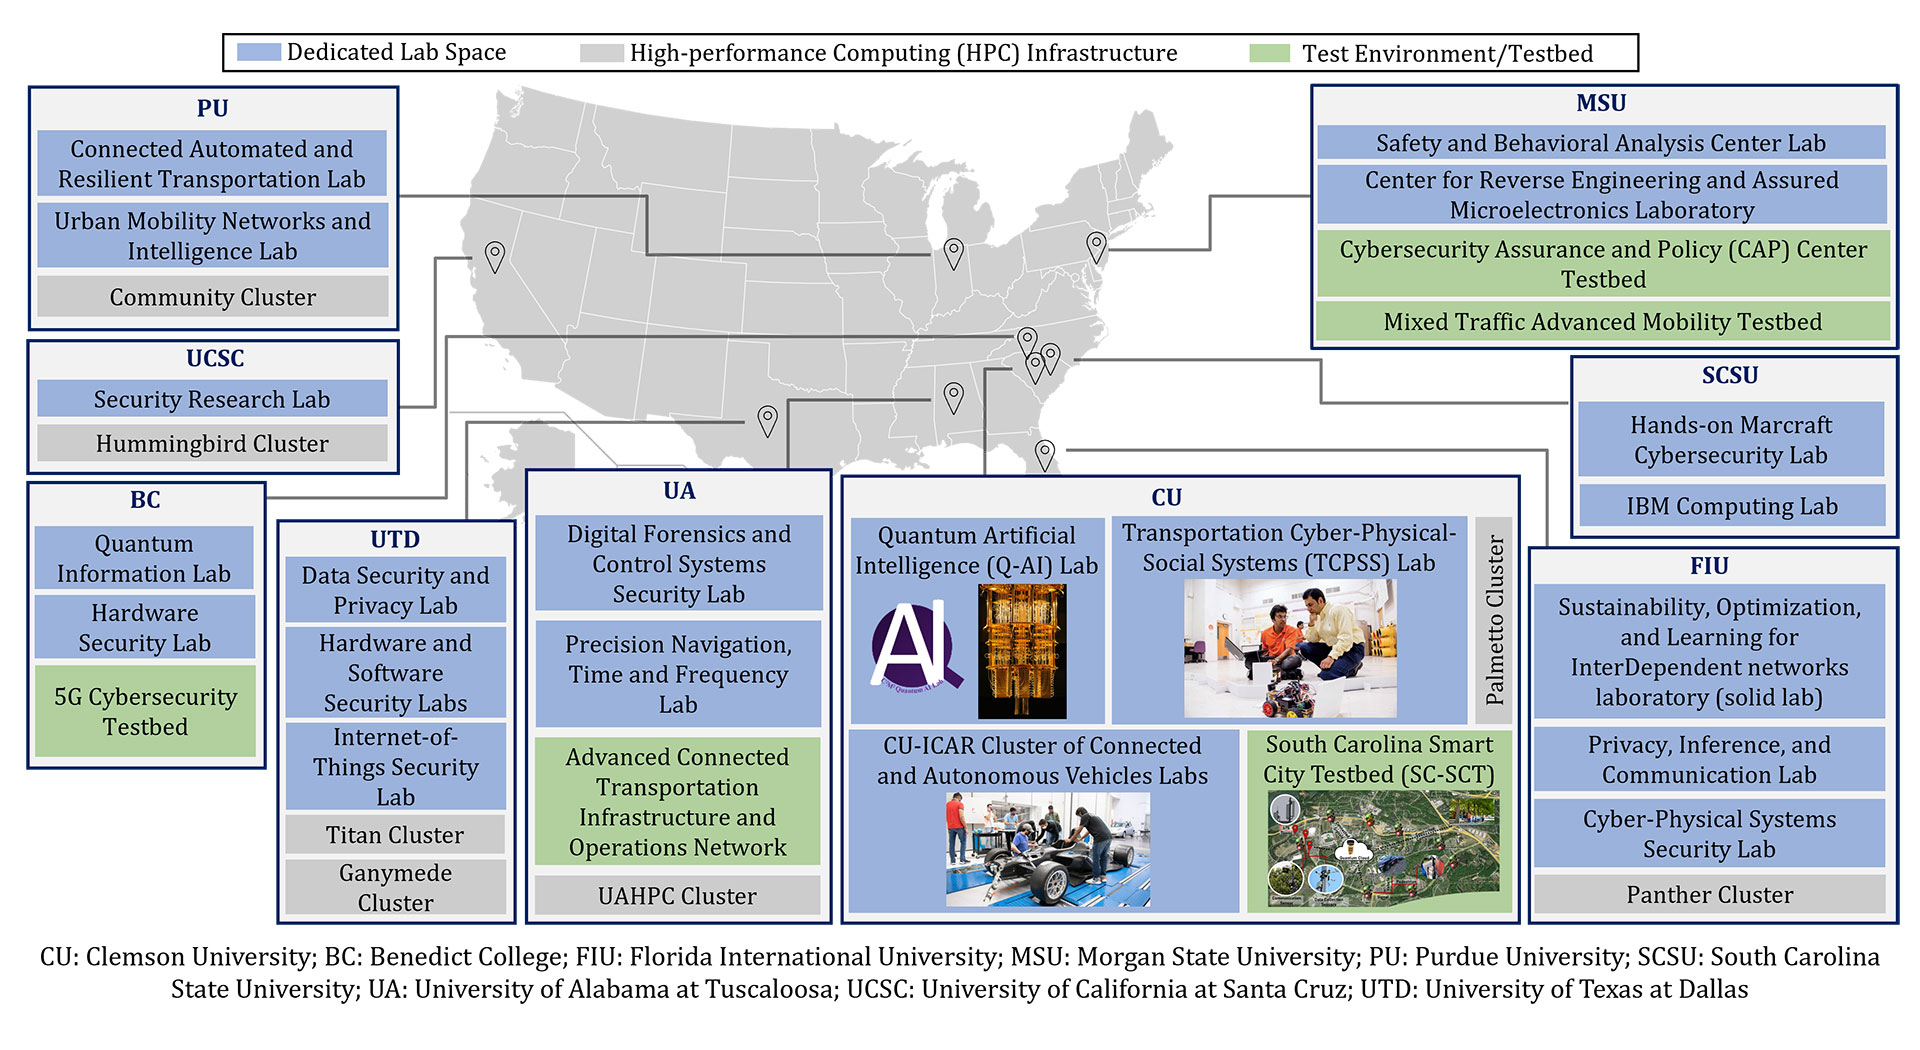 Lab space, testing environments, and hpc infrastructure in the USA.